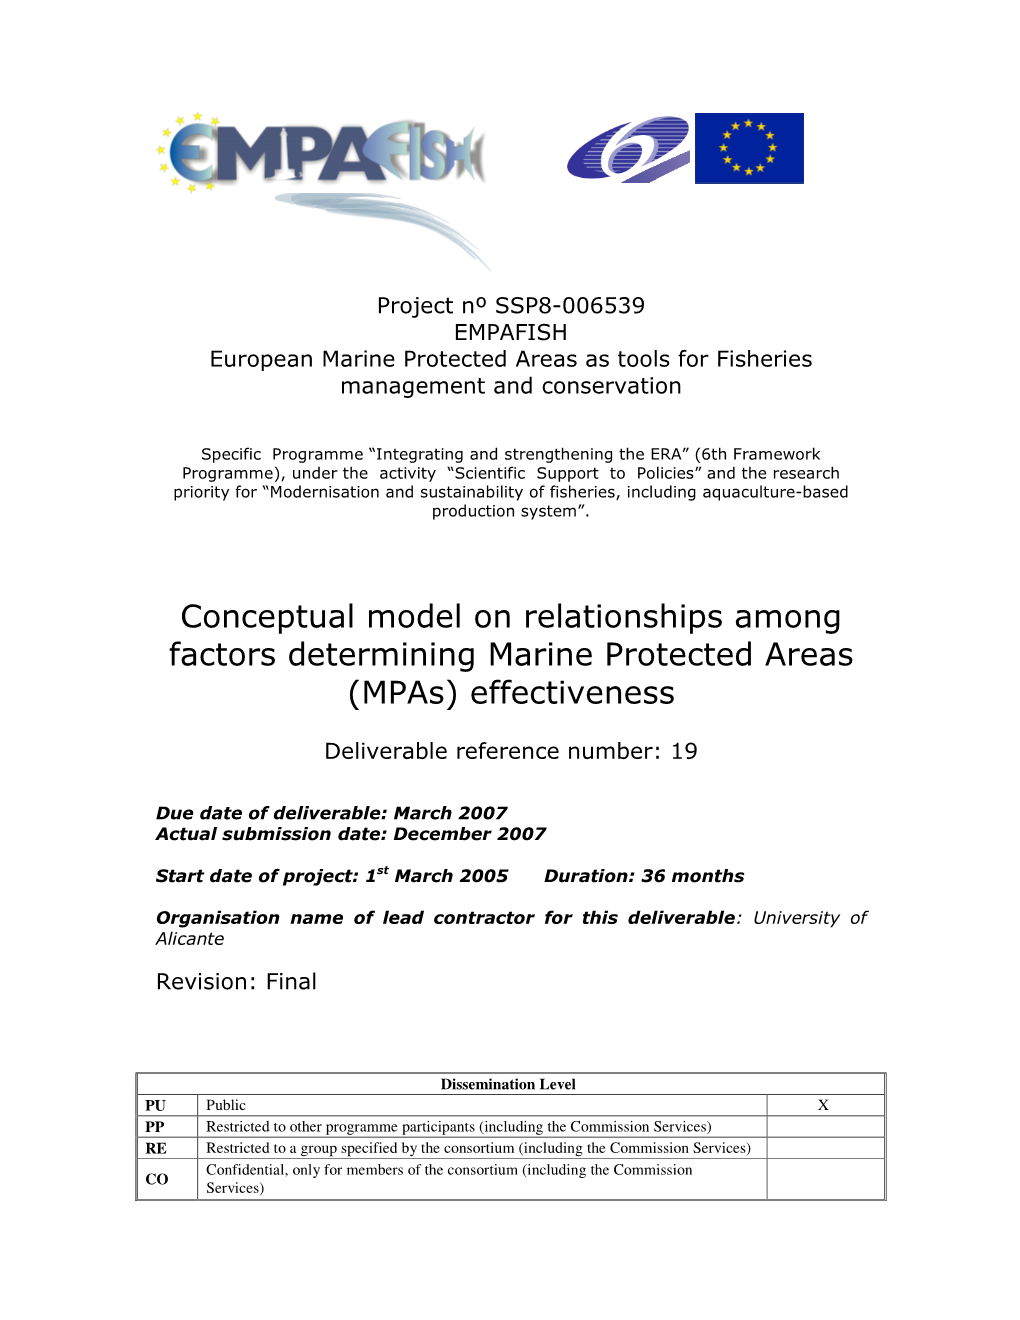 Conceptual Model on Relationships Among Factors Determining Marine Protected Areas (Mpas) Effectiveness